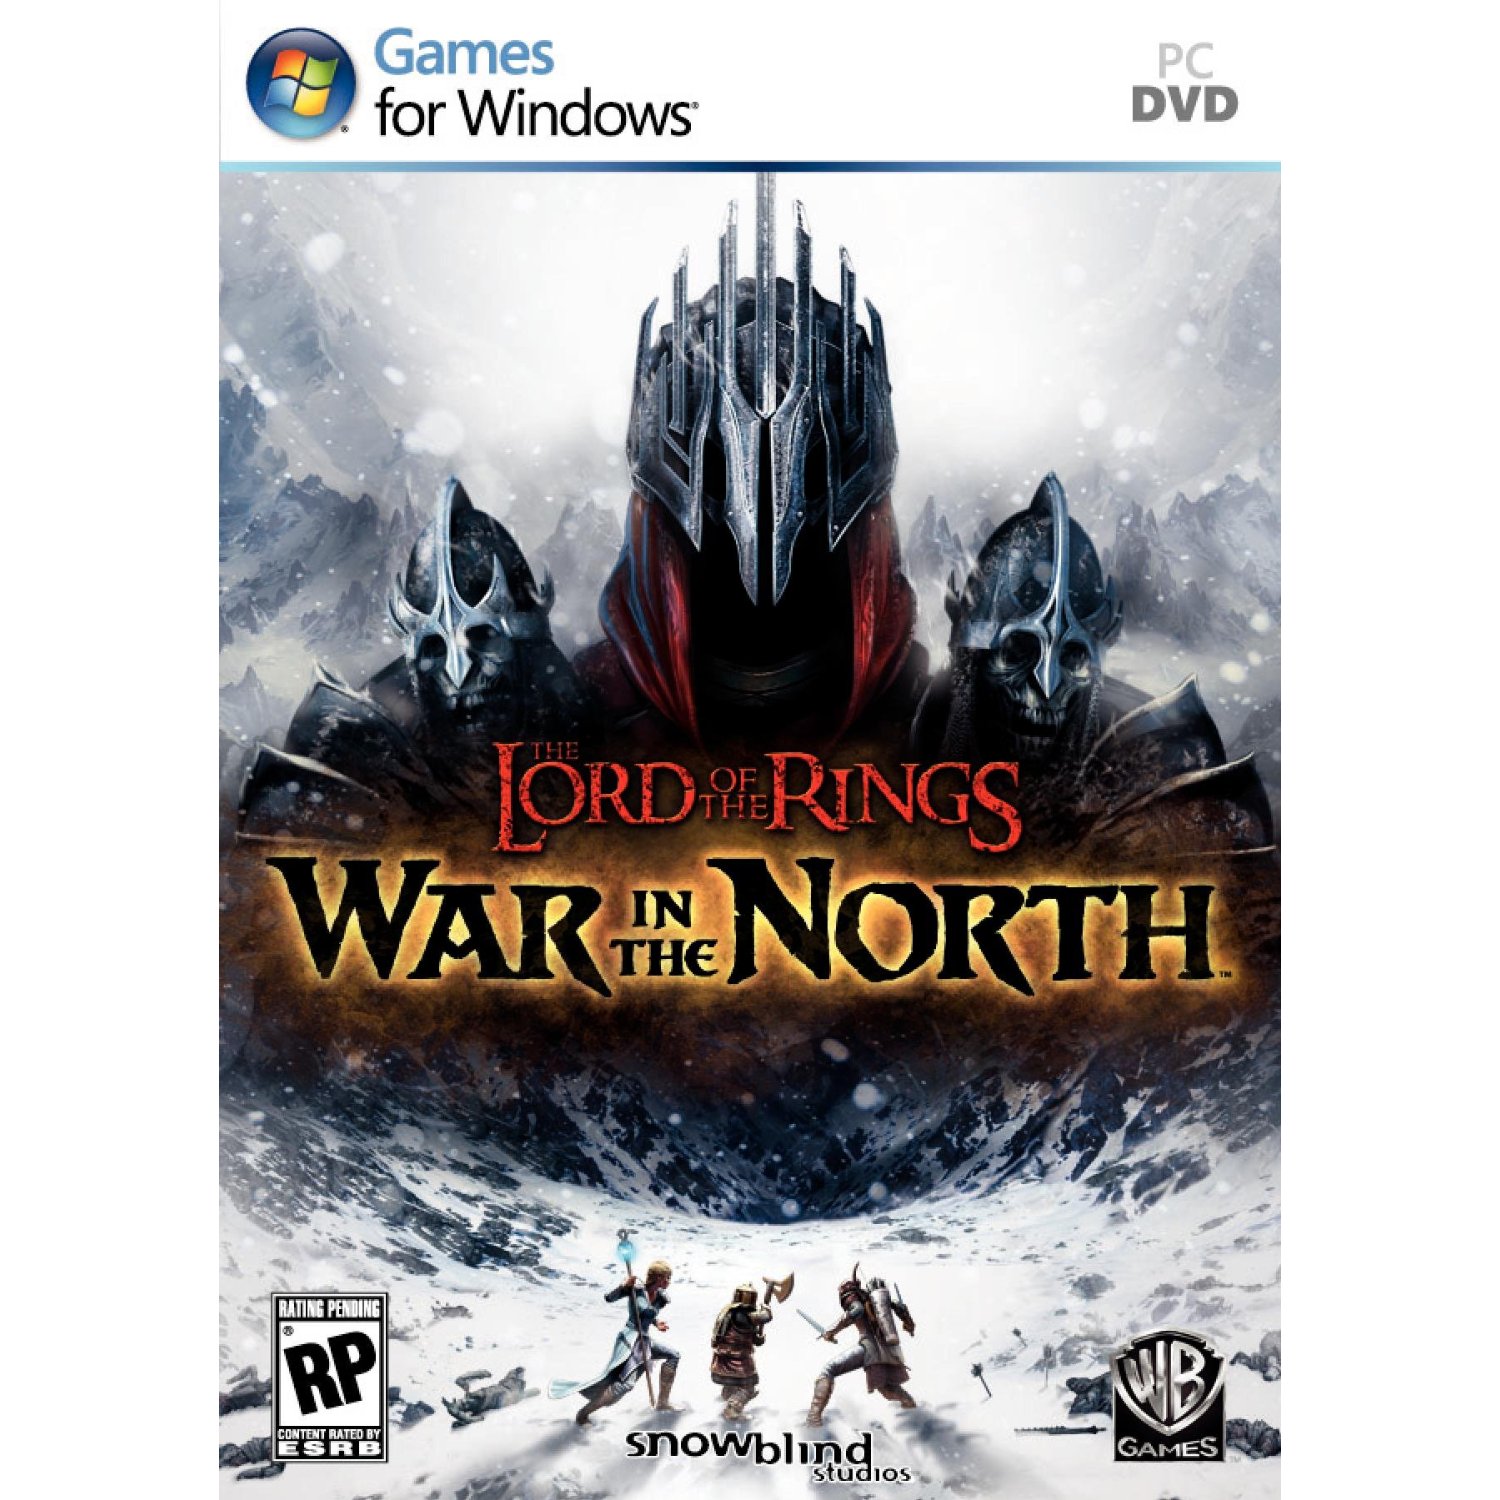 http://thetechjournal.com/wp-content/uploads/images/1111/1320114588-lord-of-the-rings-war-in-the-north--game-for-pc-1.jpg